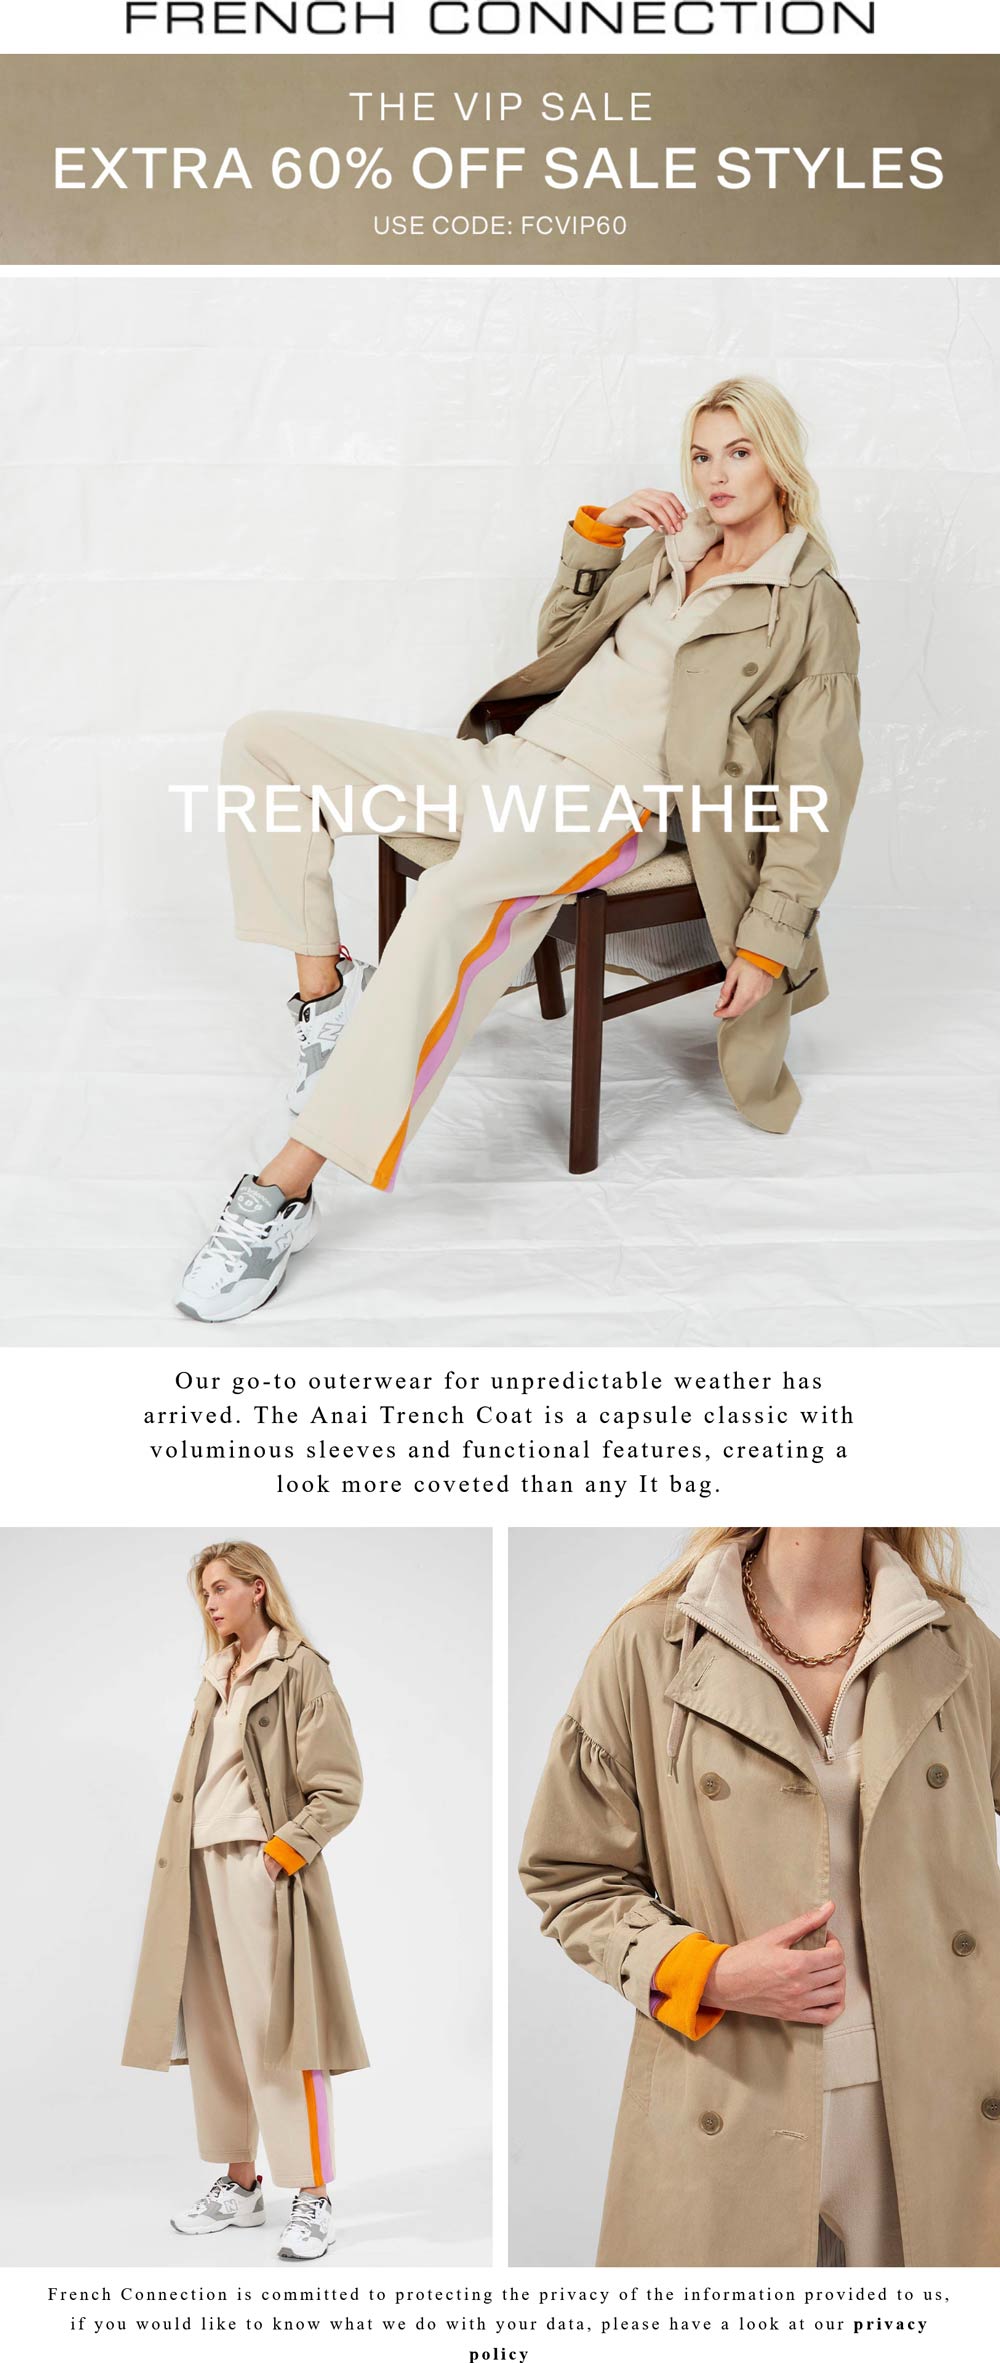 French Connection stores Coupon  Extra 60% off sale styles at French Connection via promo code FCVIP60 #frenchconnection 